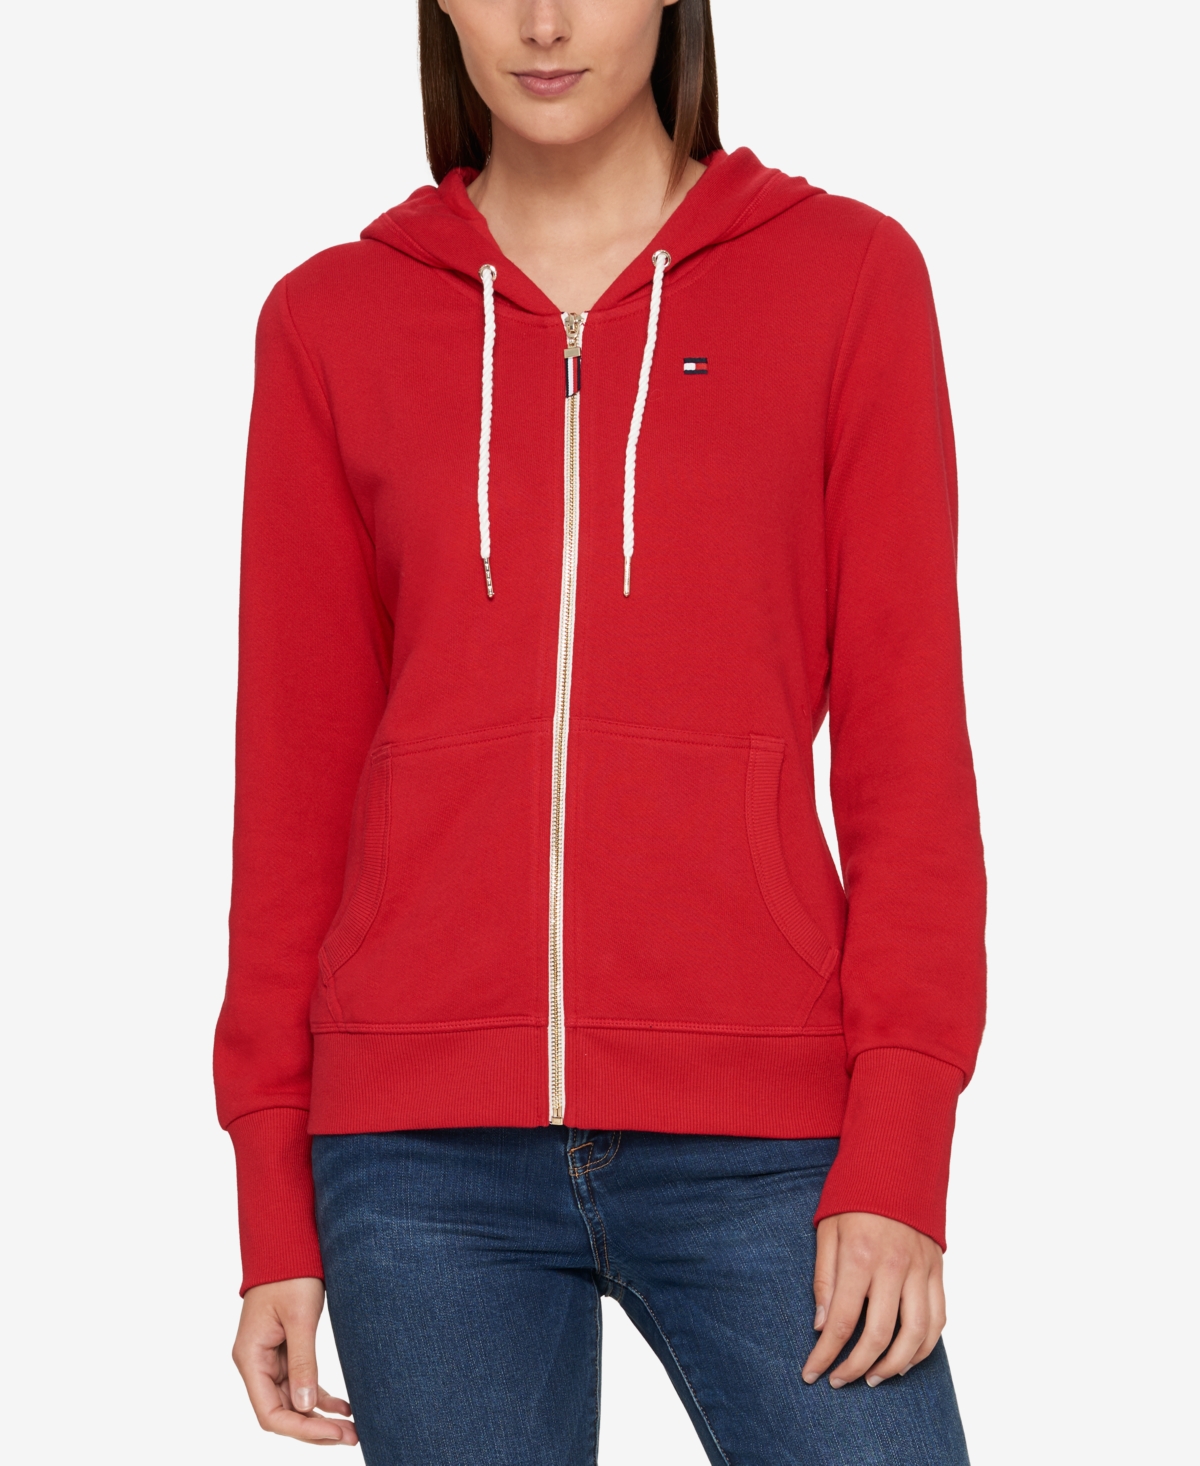  Tommy Hilfiger Women's French Terry Hoodie, Created for Macy's